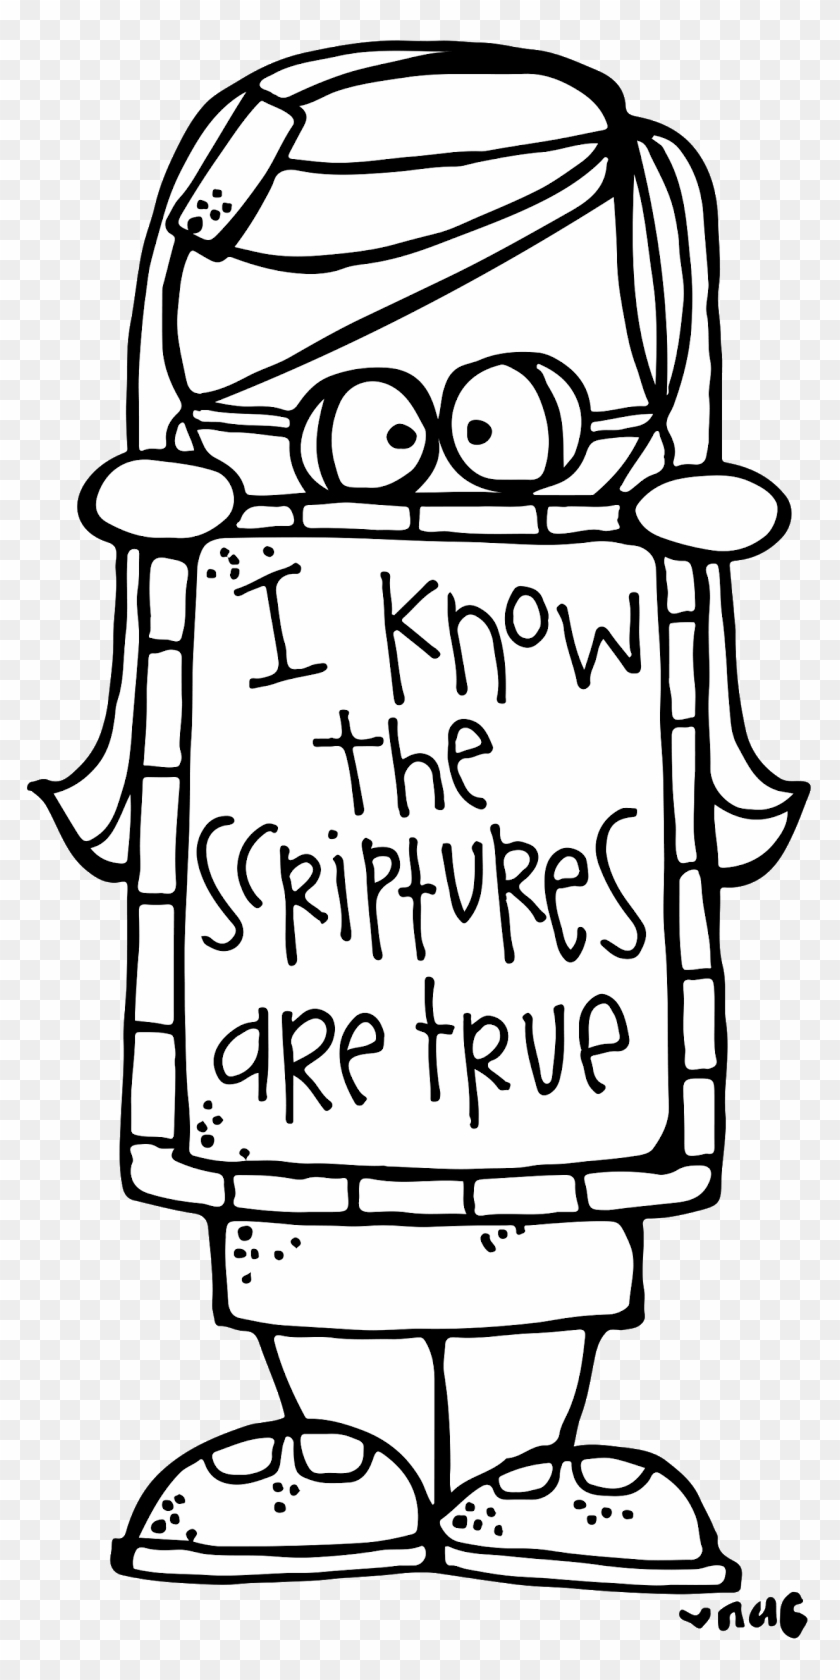 Melonheadz Lds Illustrating - Know The Scriptures Are True Coloring Pages #402067